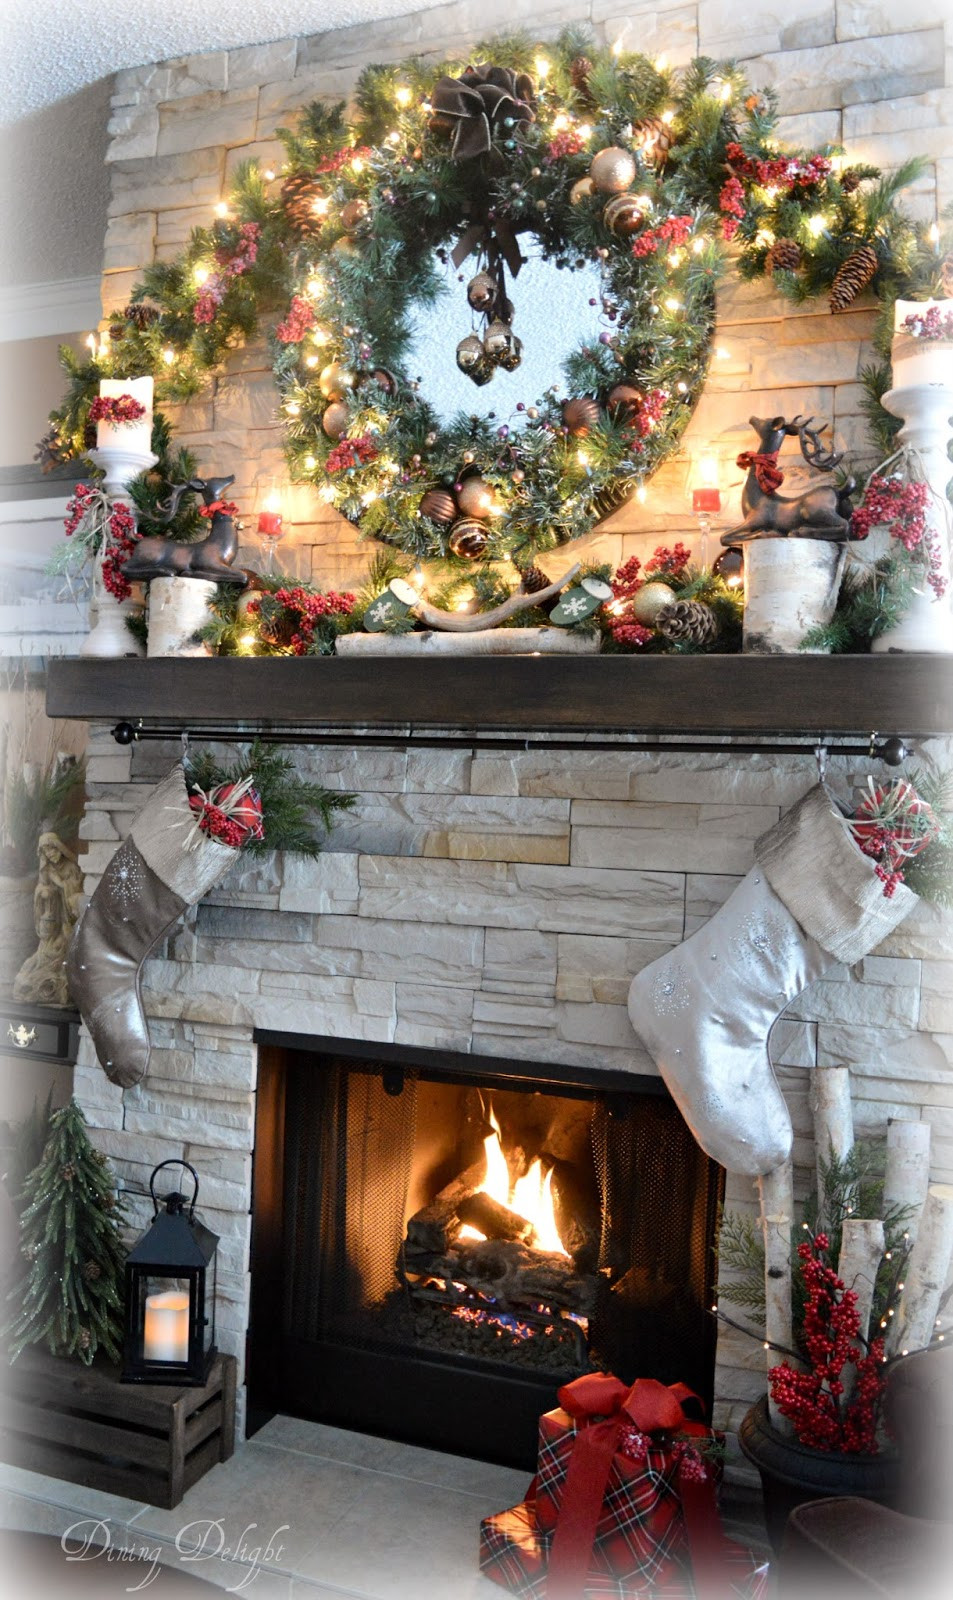 Fireplace At Christmas
 Dining Delight Holiday Home Tour Christmas in a Cozy House